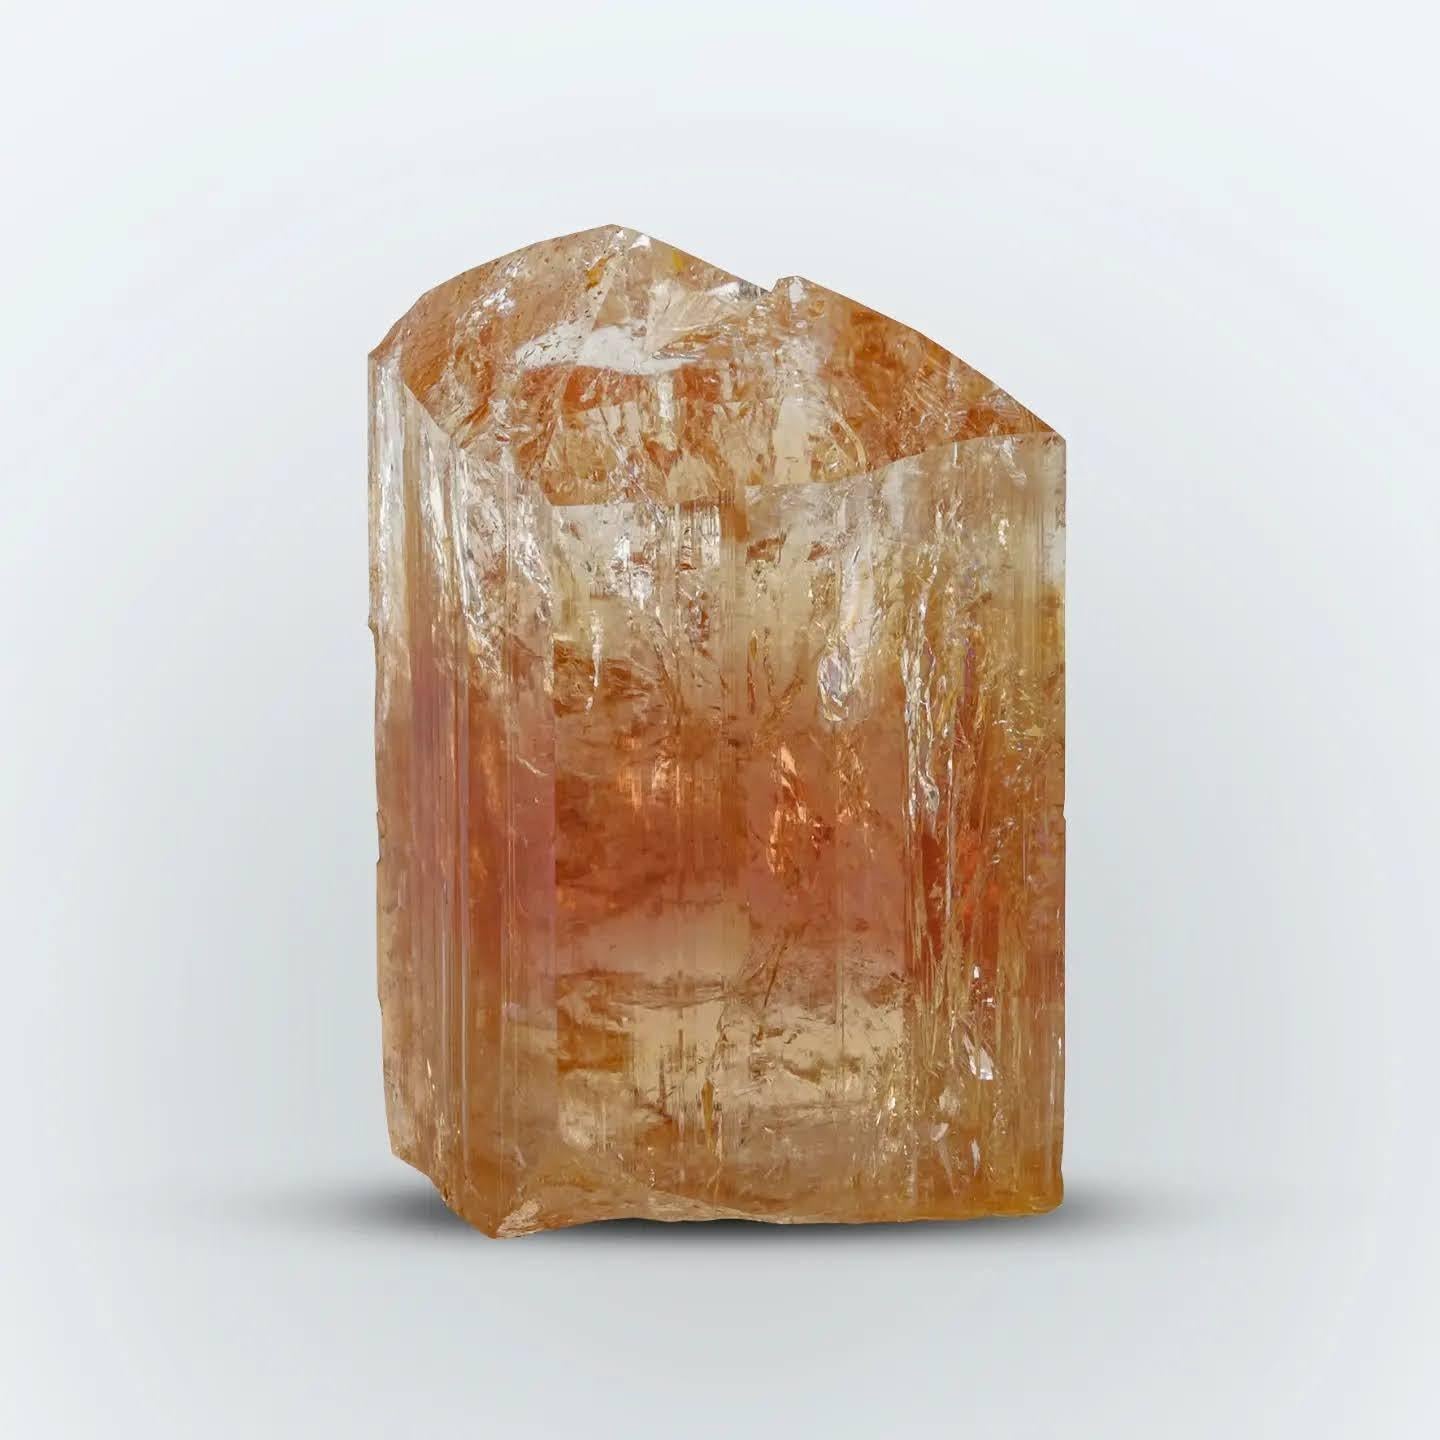 Uncut Gorgeous Double Terminated Topaz Crystal With Great Luster From Pakistan For Sale